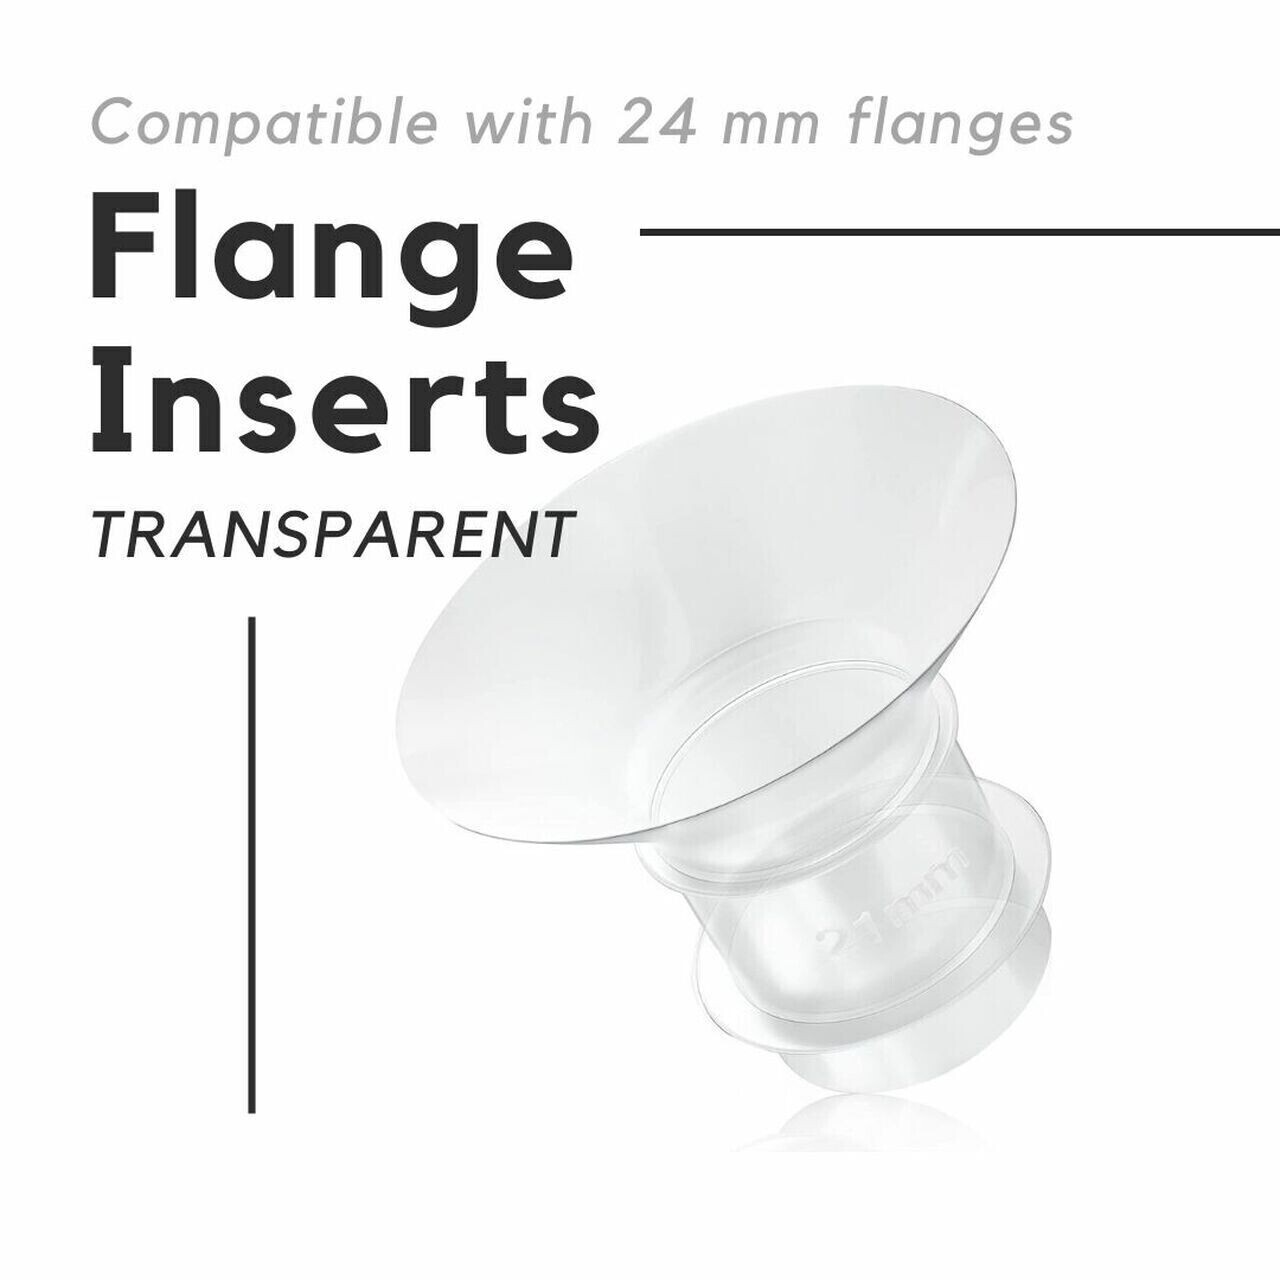 ​Silicone Flange Inserts - 19mm